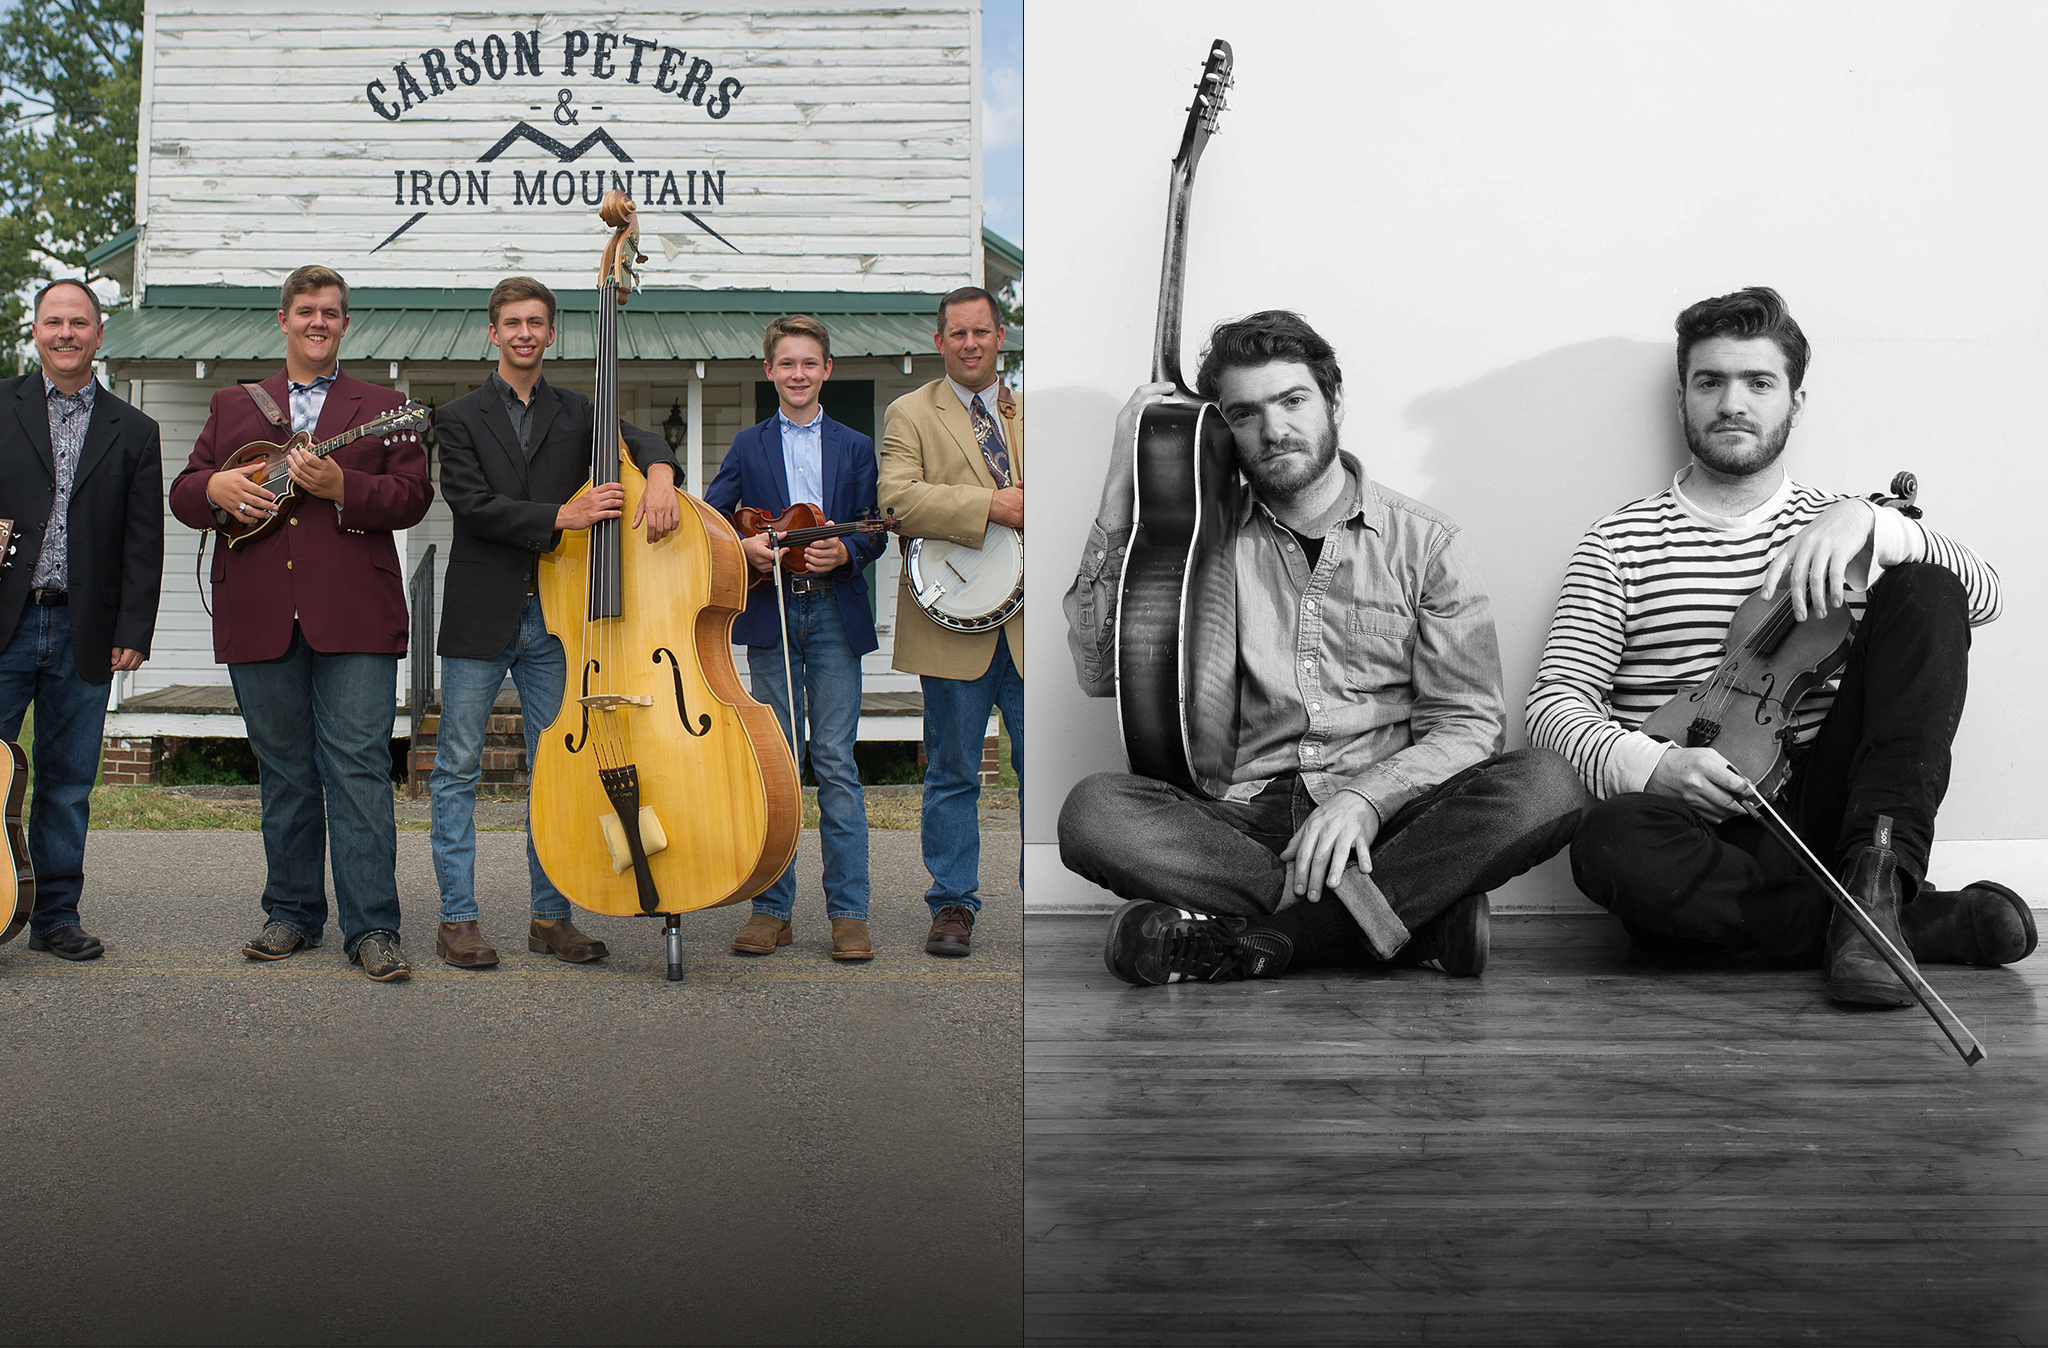 Radio Bristol Presents Farm and Fun Time with Carson Peters and Iron Mountain and The Brother Brothers